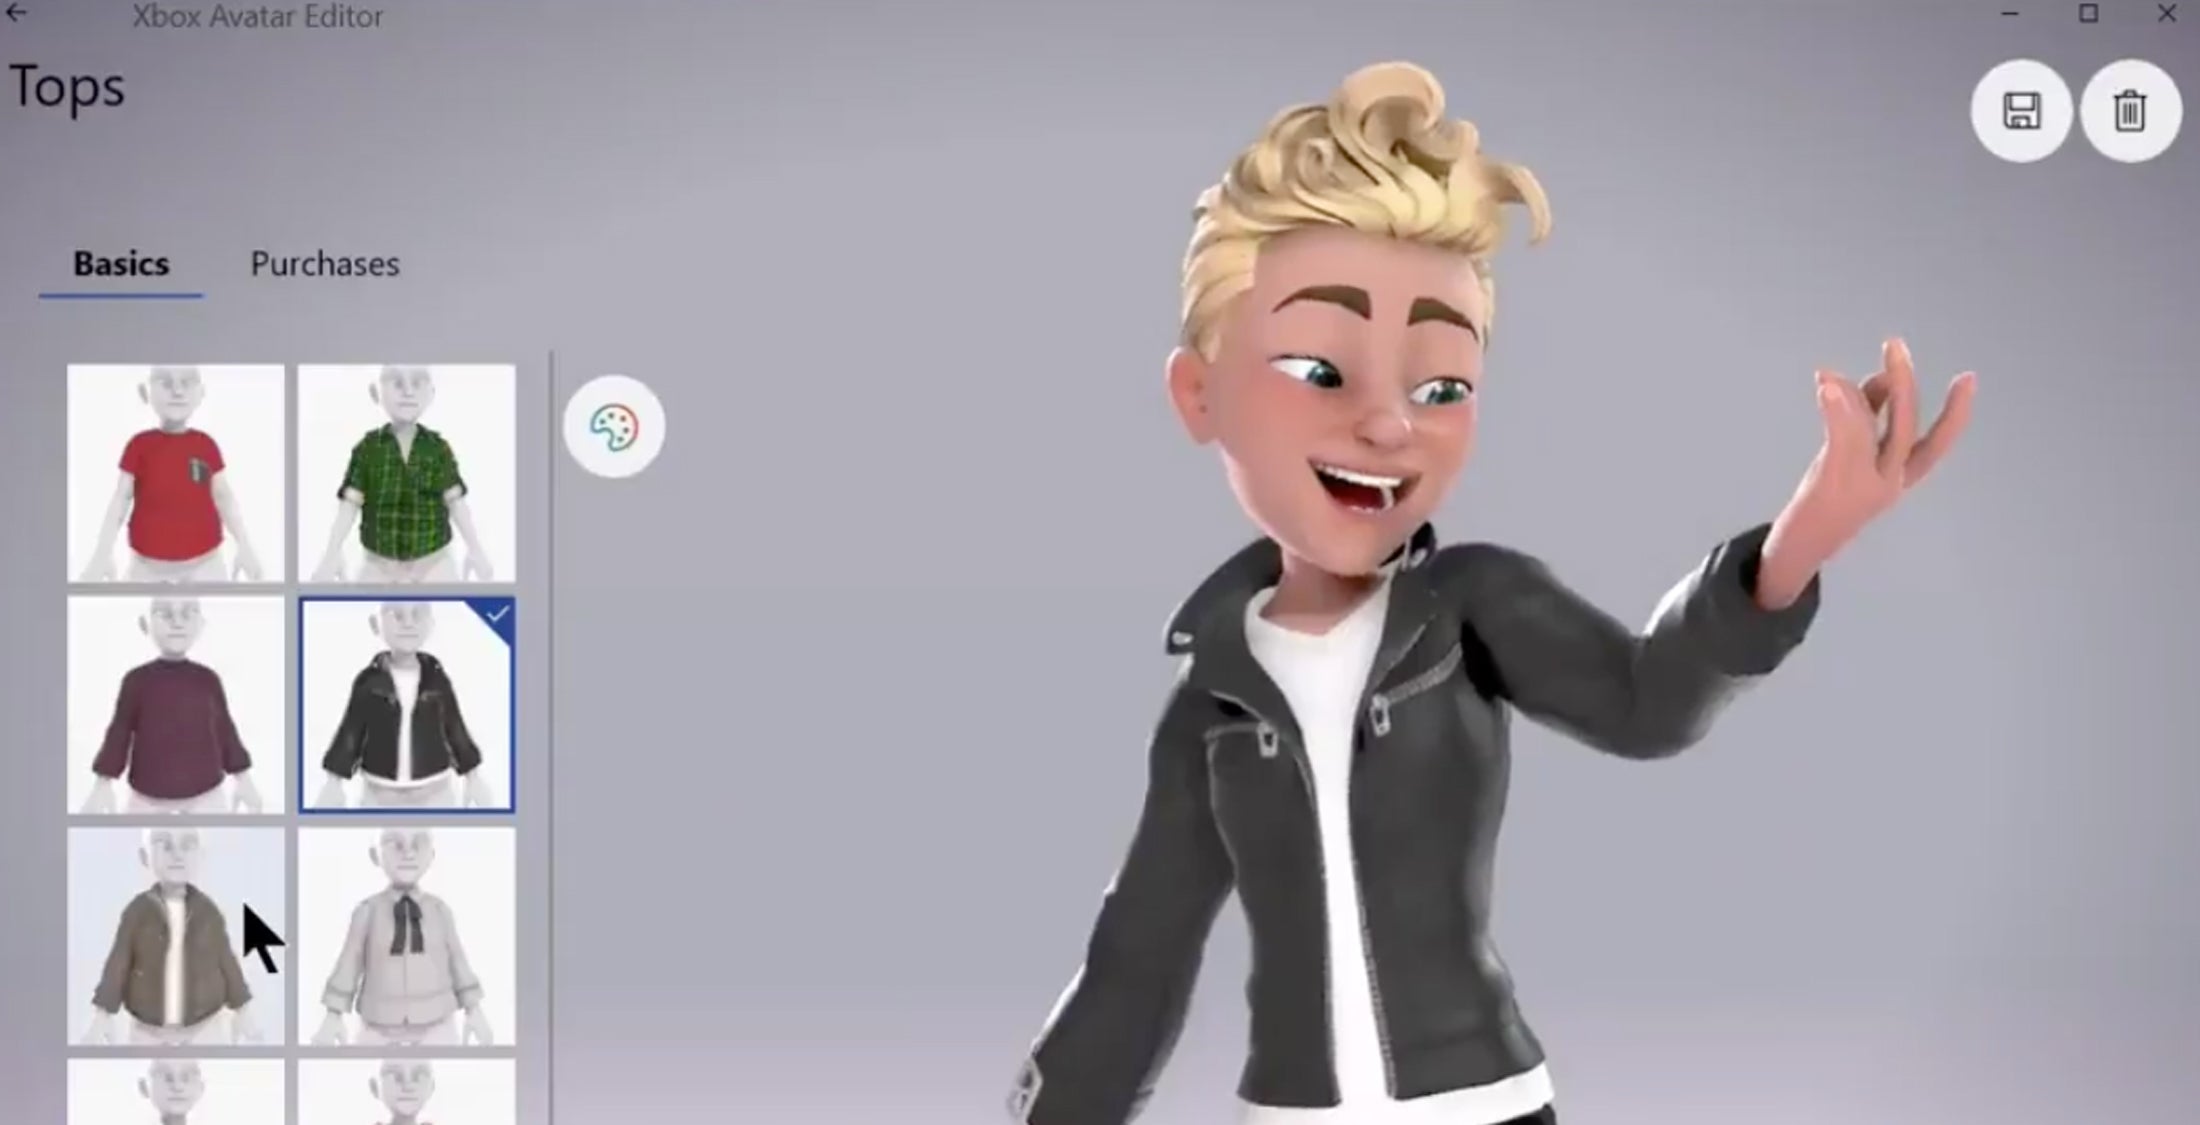 heno Formular Cervecería Xbox Avatar Editor leaked, so why won't Microsoft just launch it already? |  Trusted Reviews